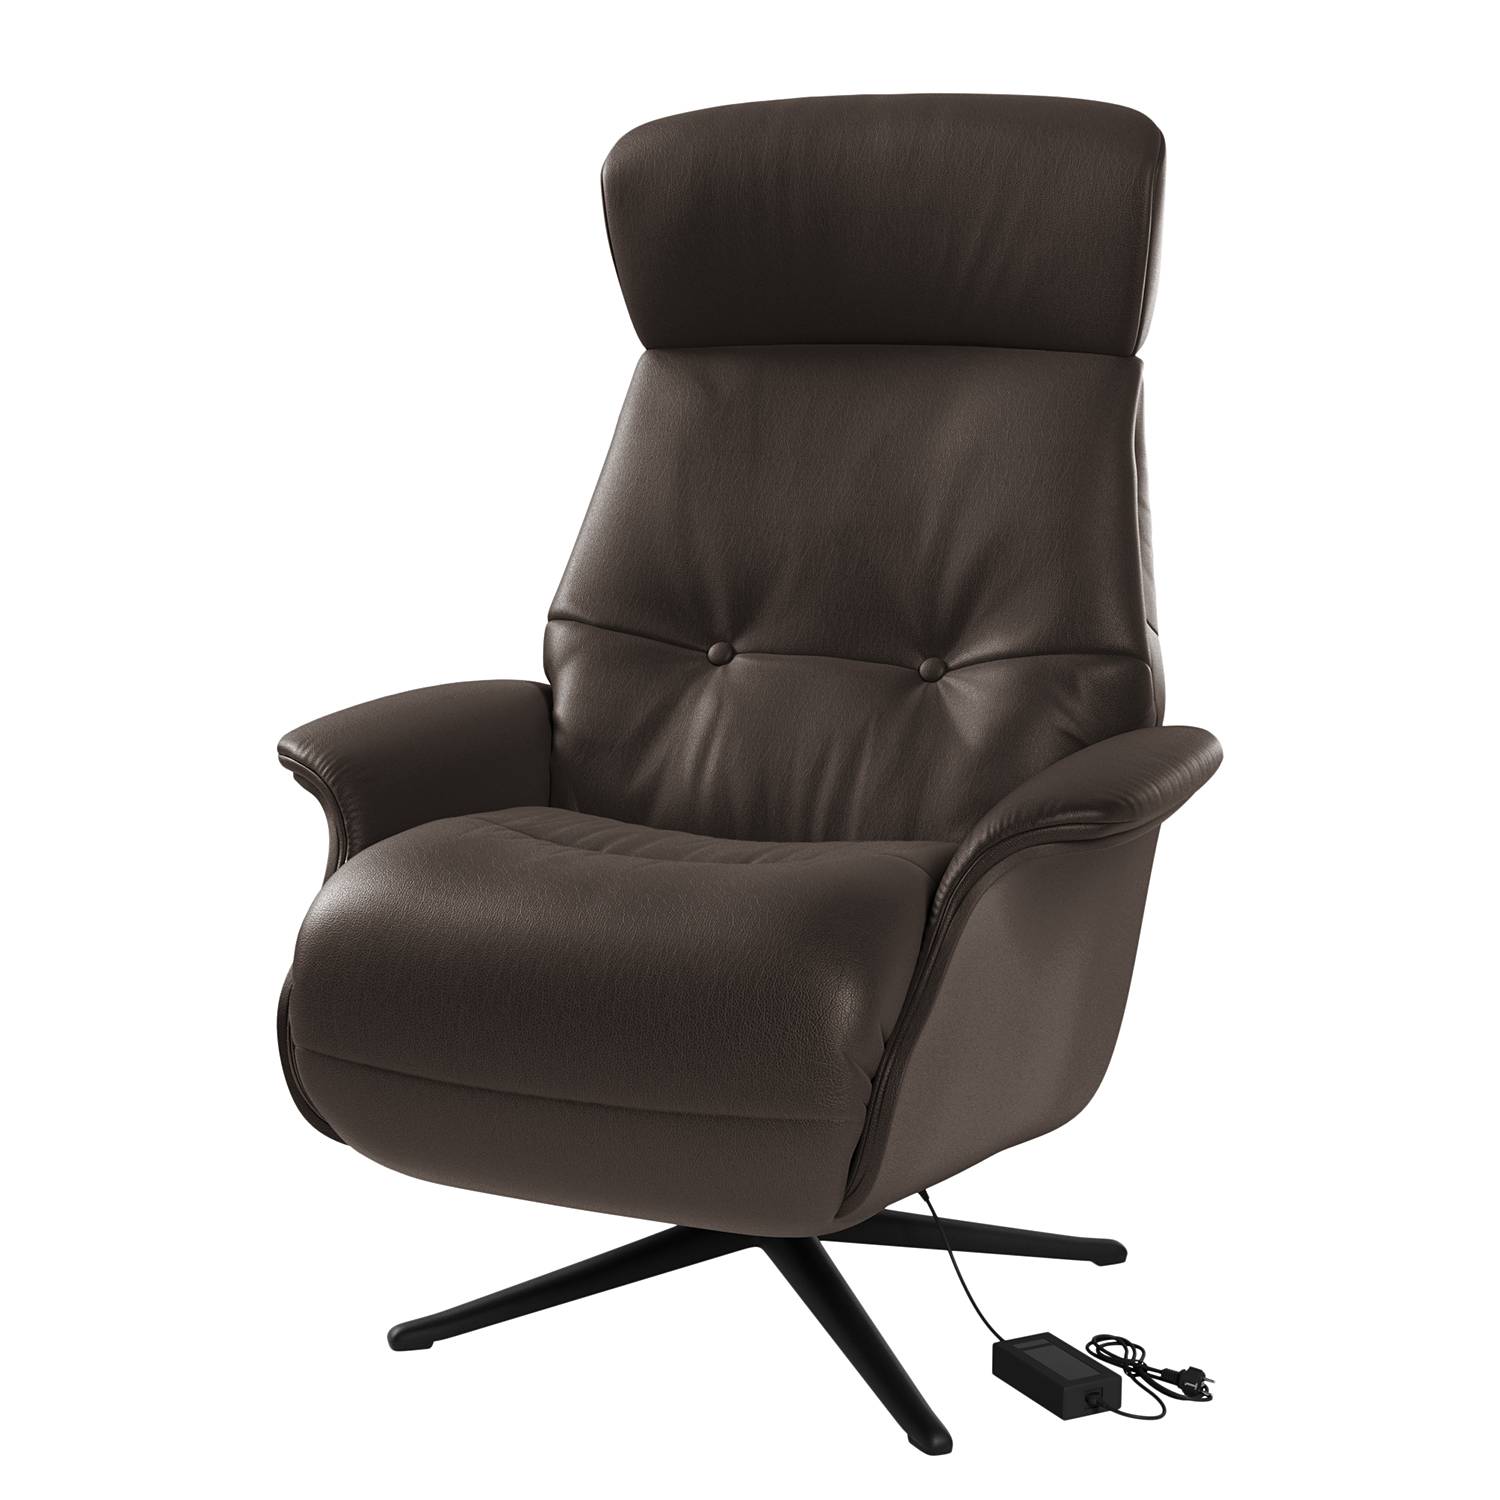 Image of Fauteuil relax Anderson VI 000000001000131484